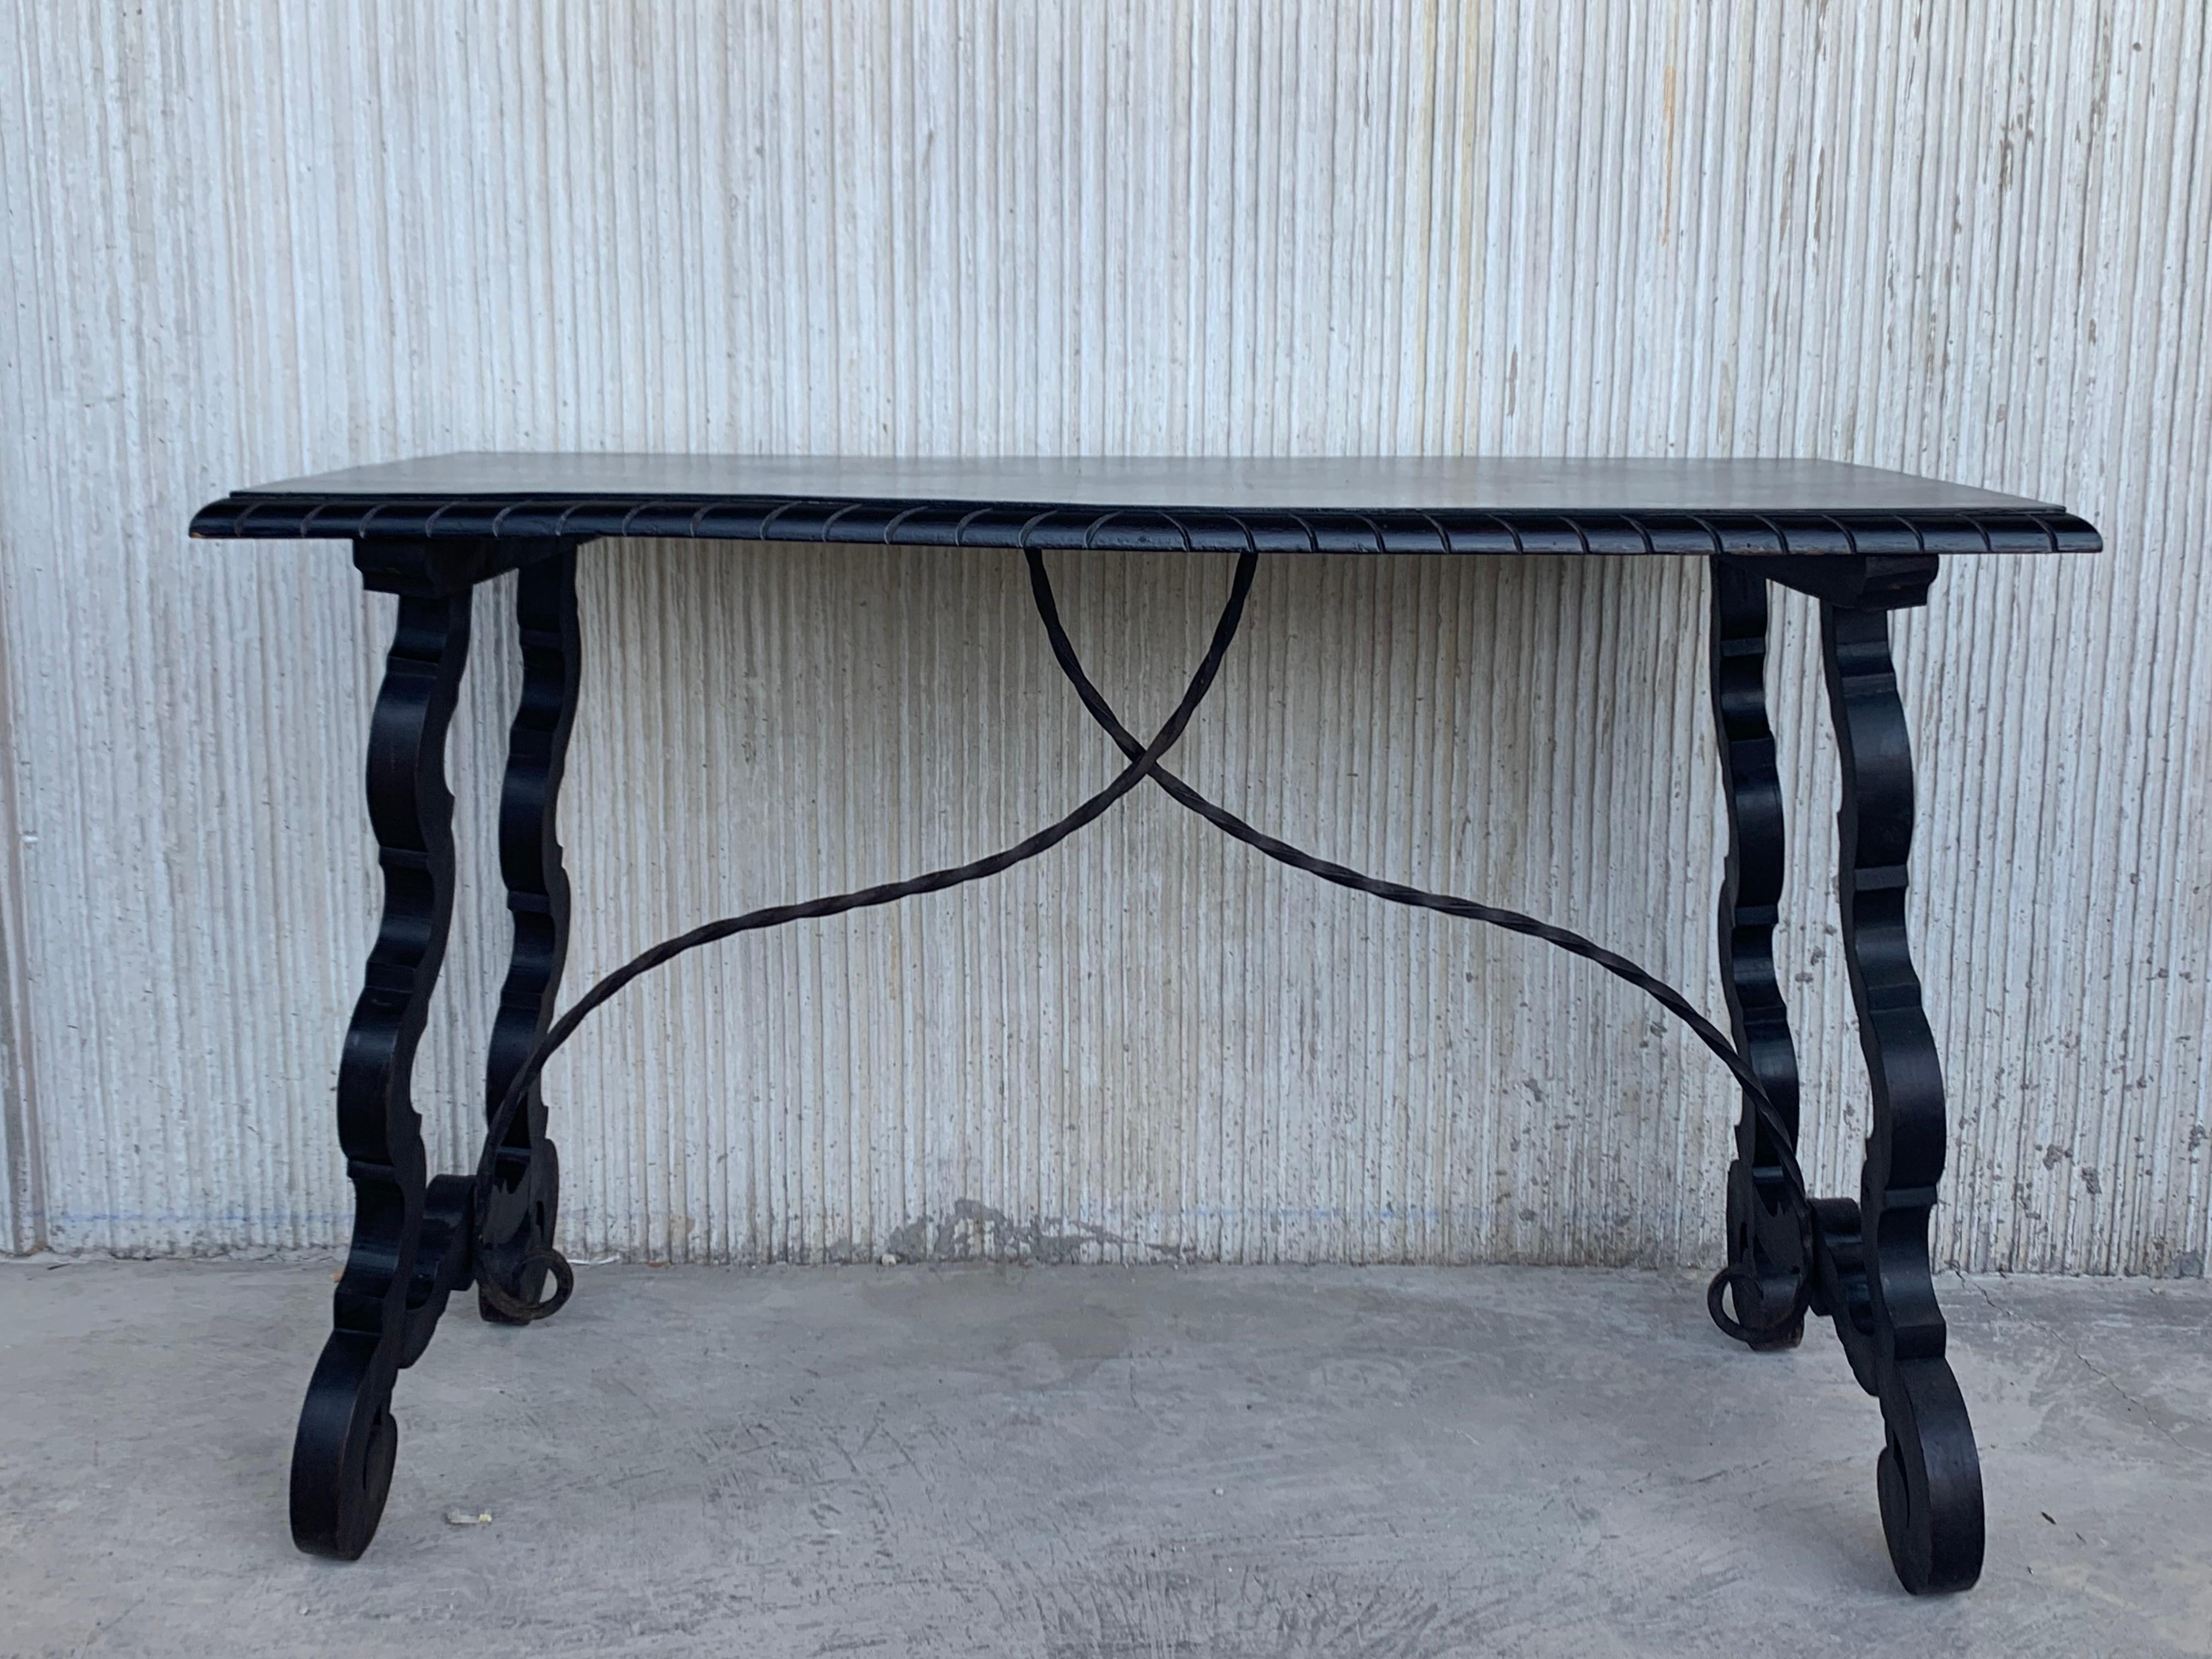 This chestnut refectory table with lyre or harp form supports and original iron stretchers. Its robust but elegant style will definitely stand out in your home or office. 

A refectory table is a long narrow table supported by heavy legs or